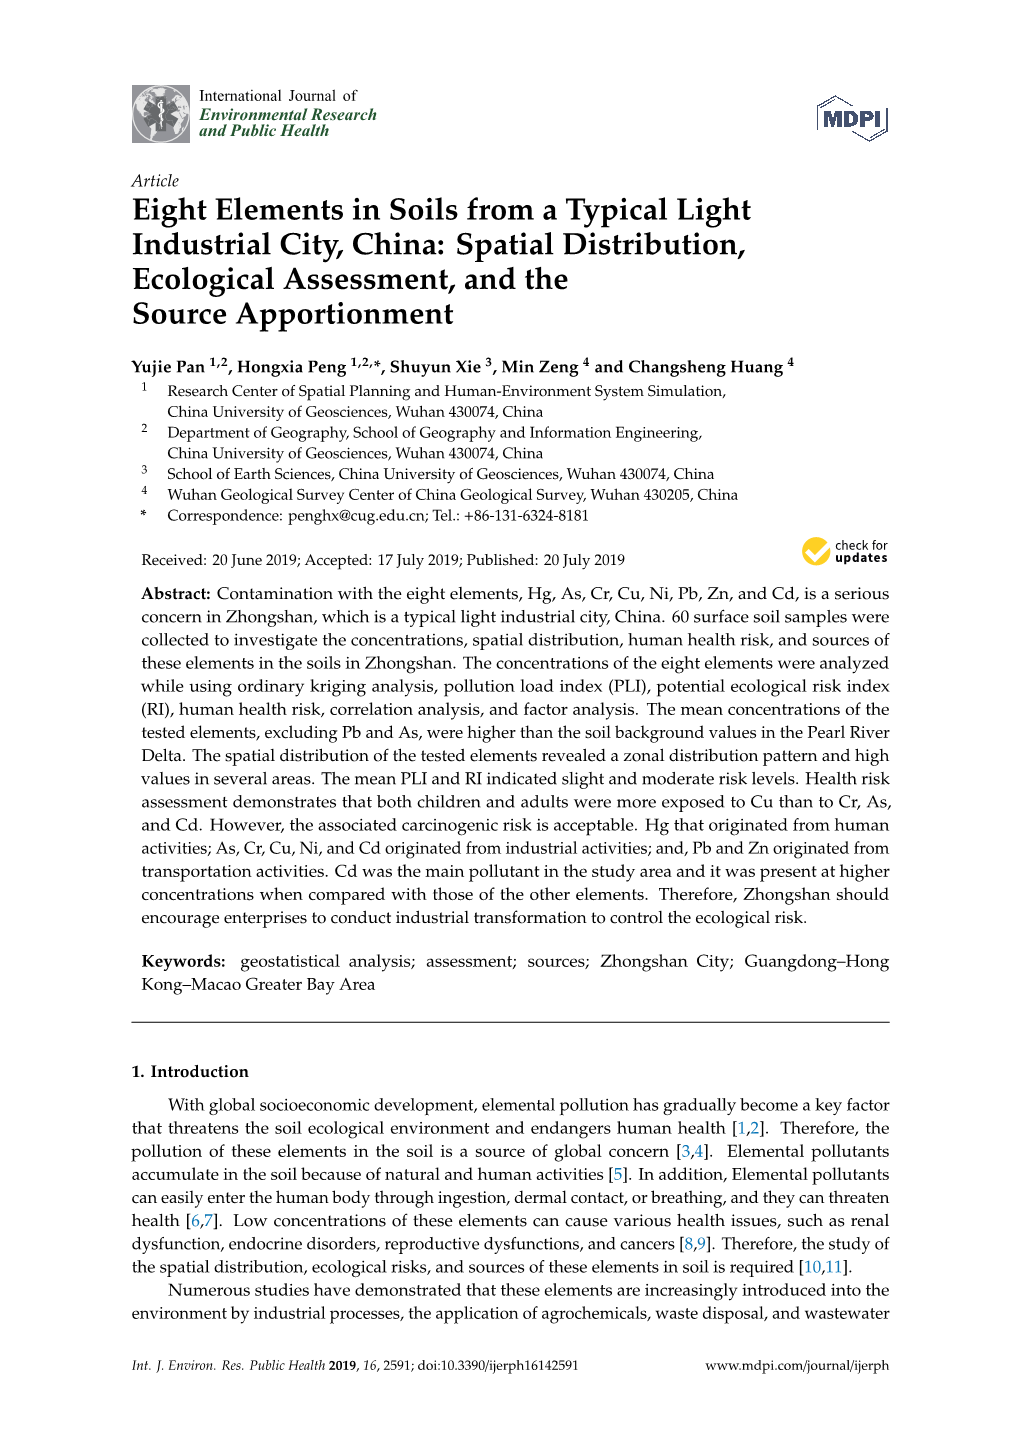 Eight Elements in Soils from a Typical Light Industrial City, China: Spatial Distribution, Ecological Assessment, and the Source Apportionment